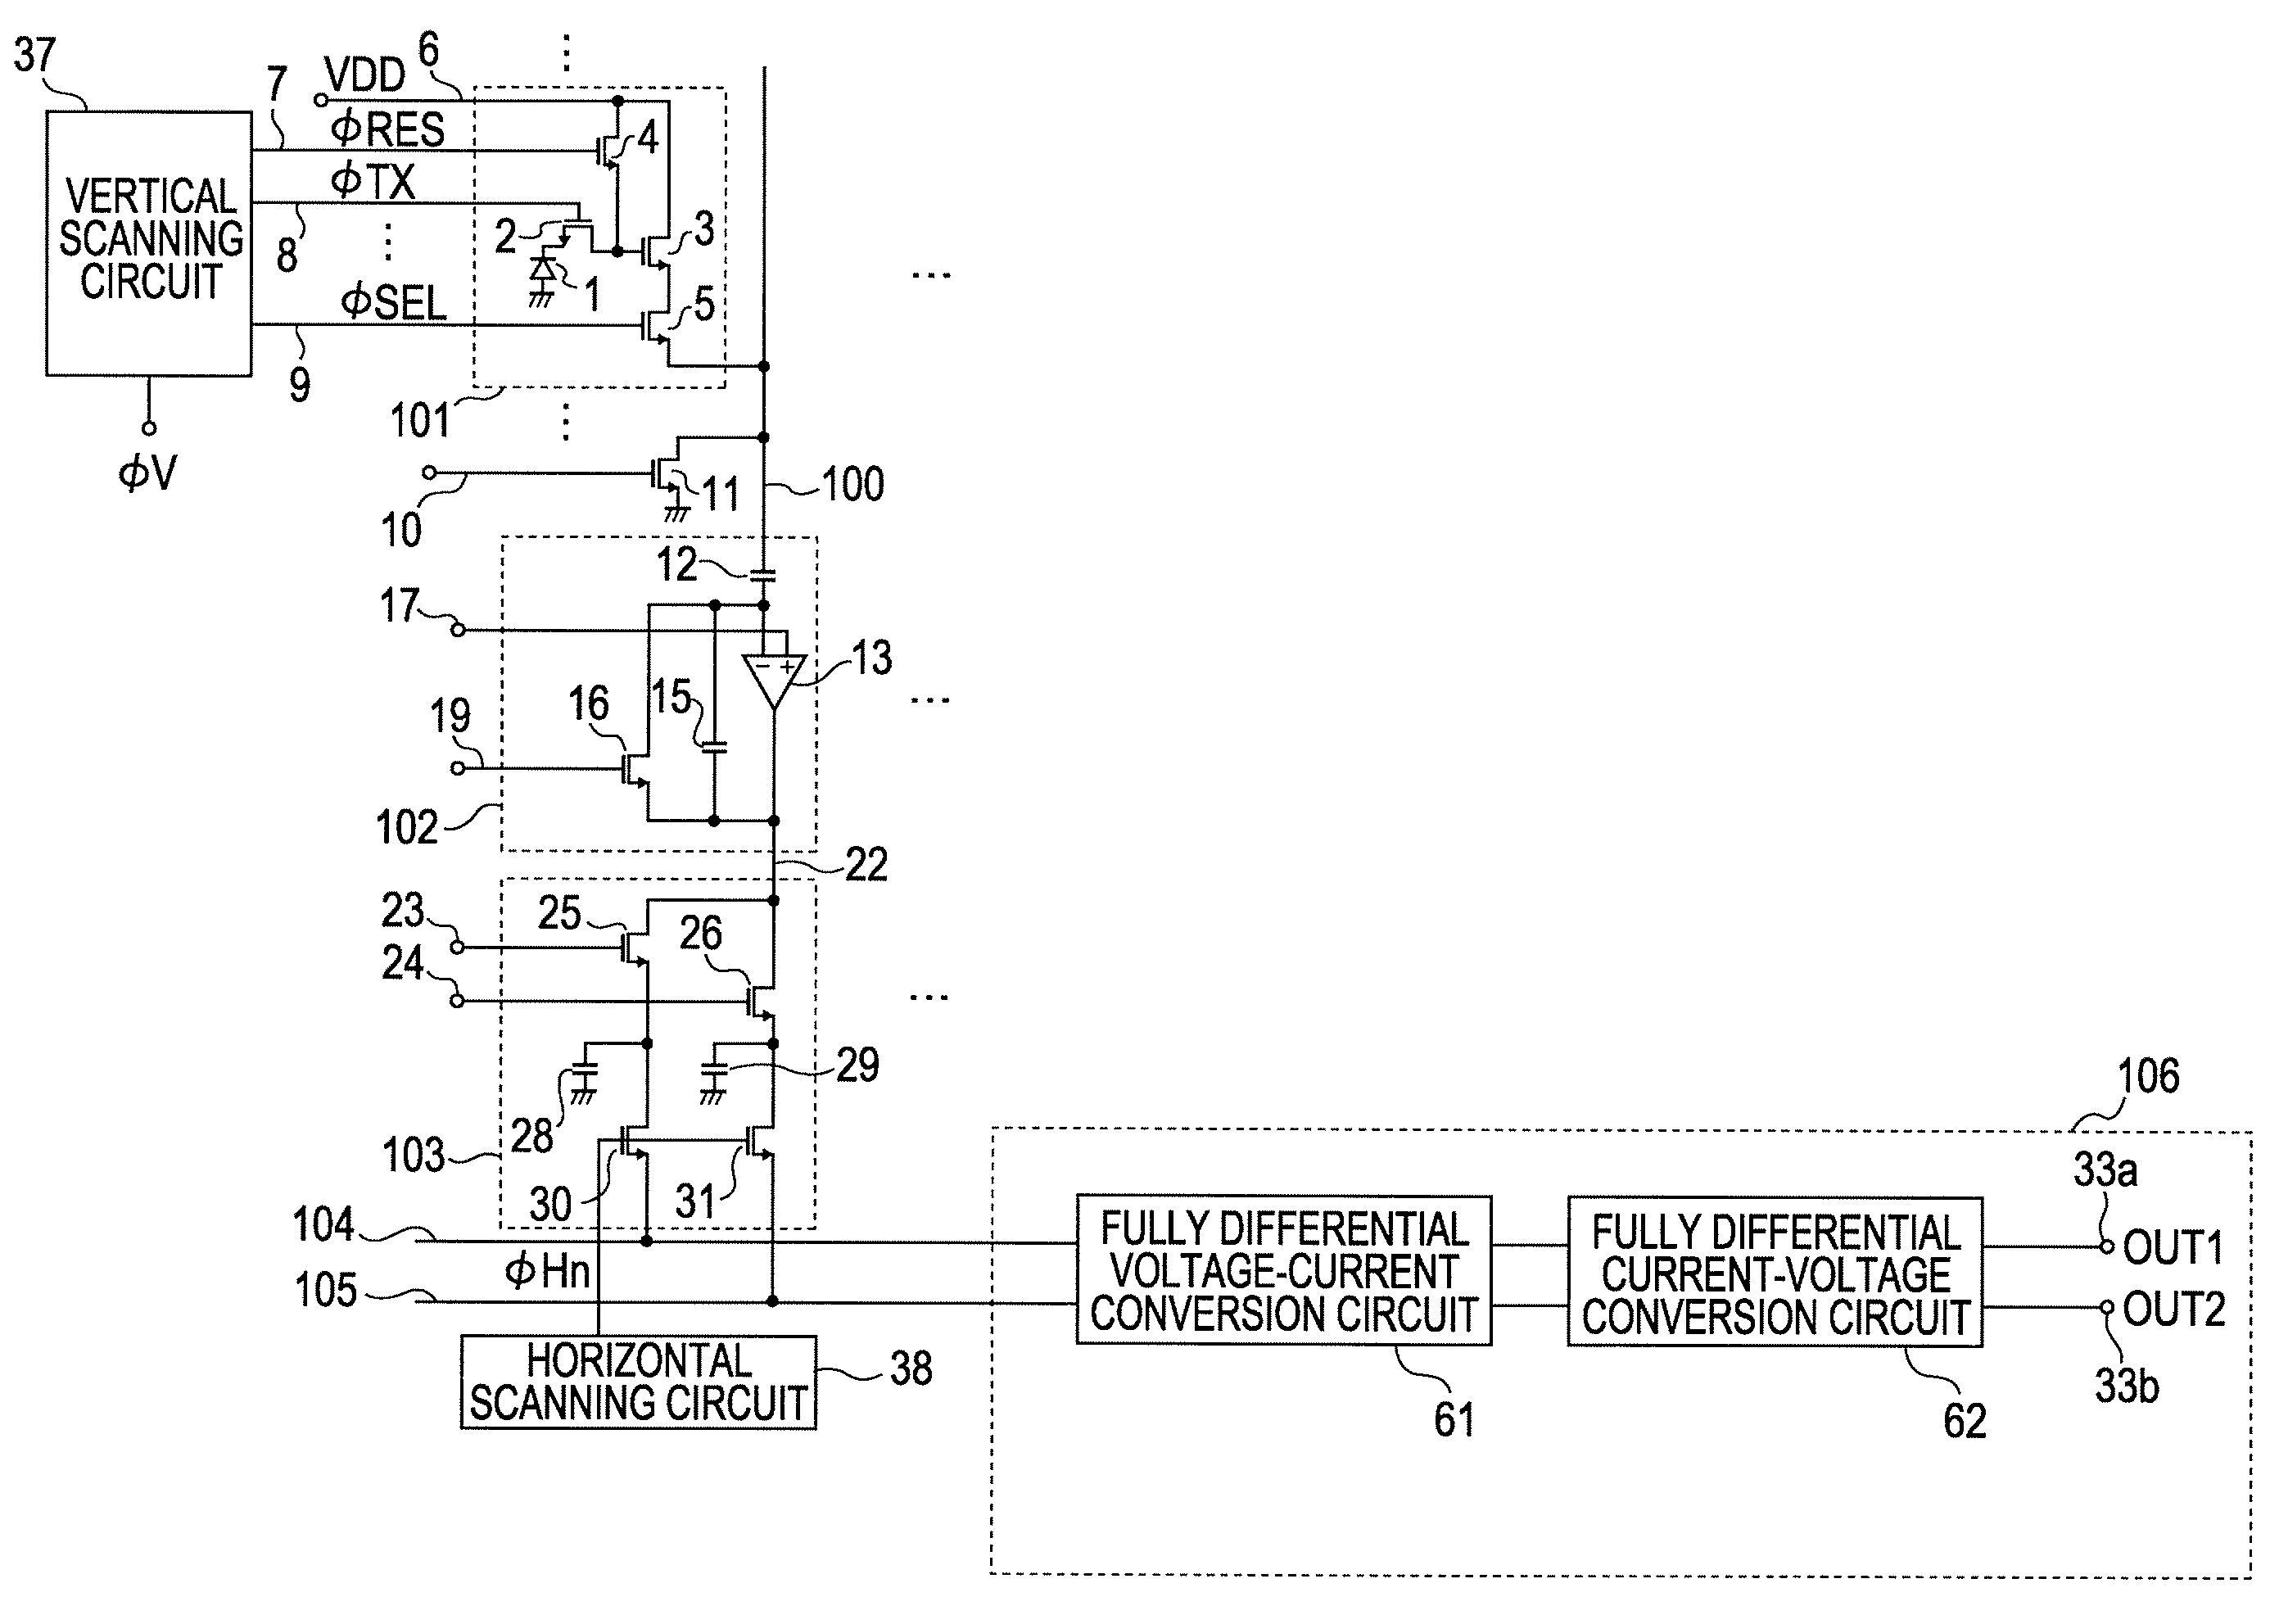 Photoelectric conversion apparatus with fully differential amplifier